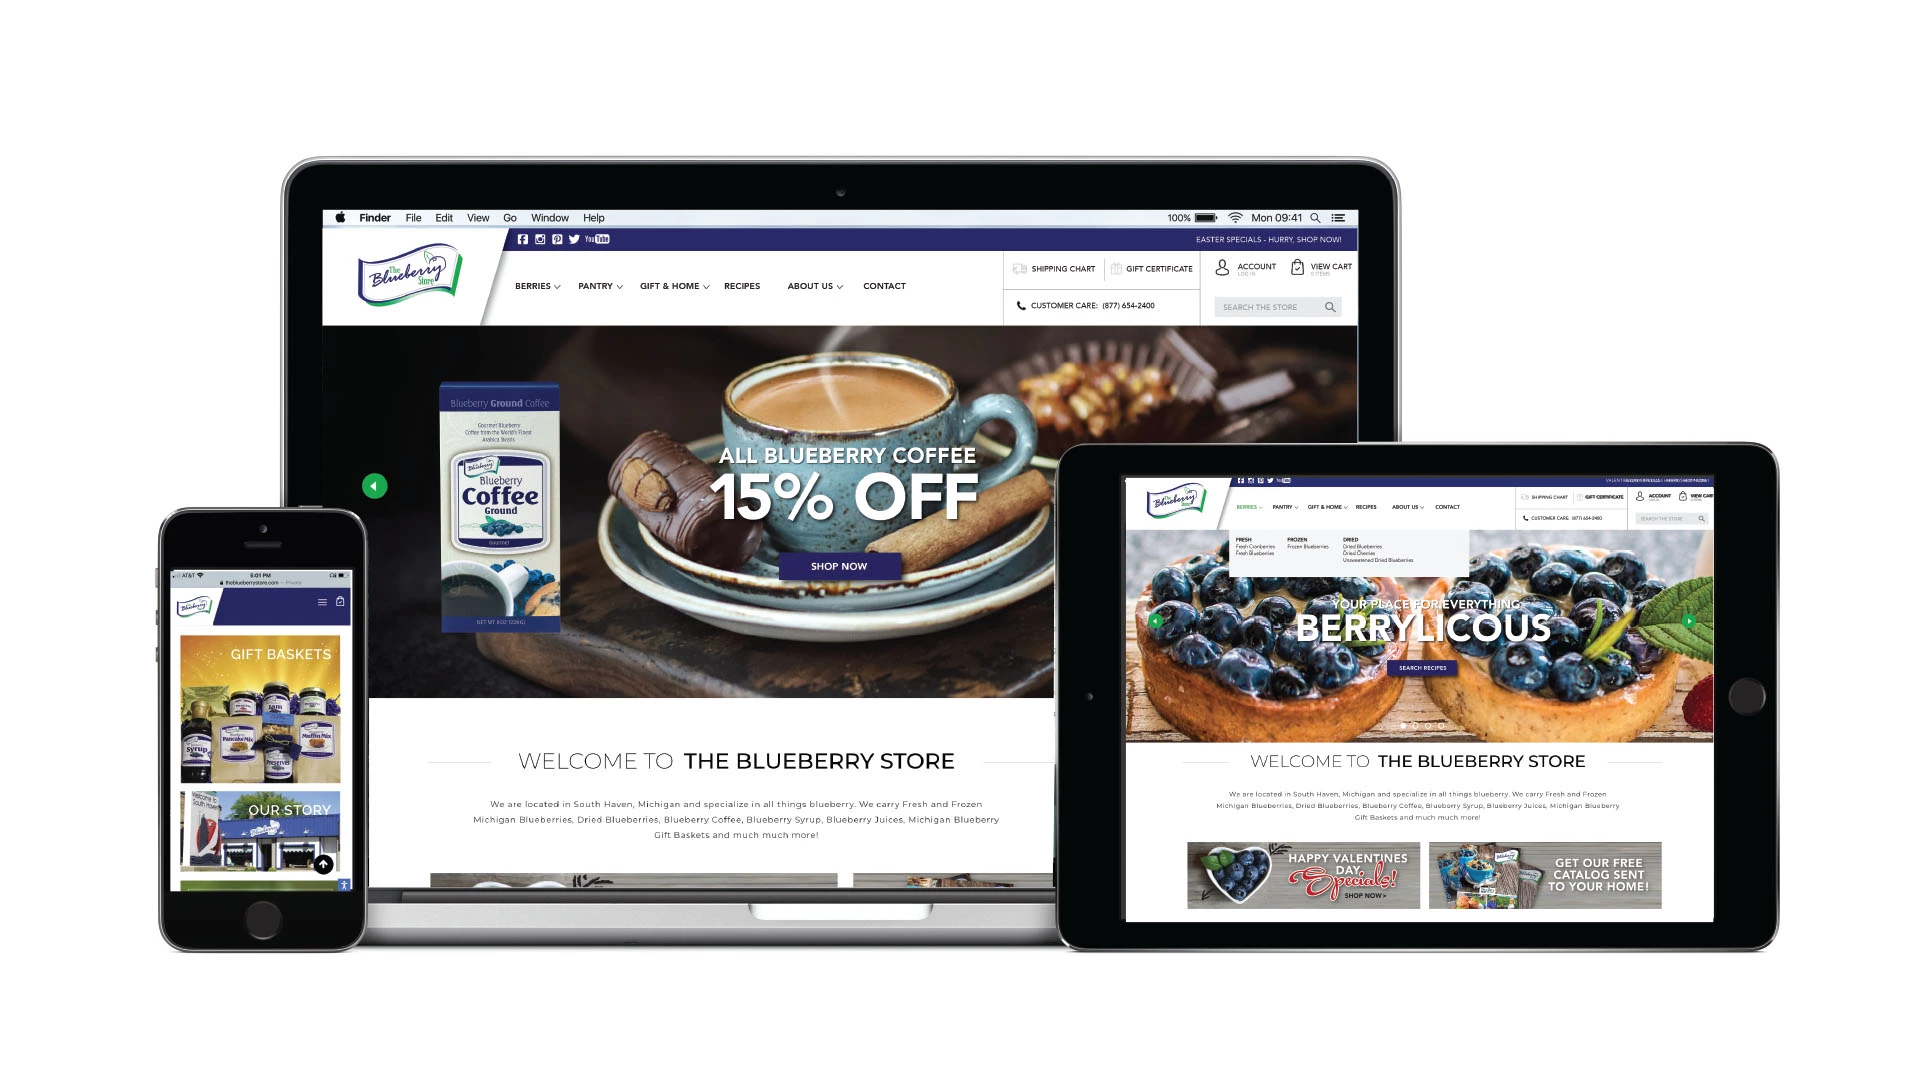 The Blueberry Store Website